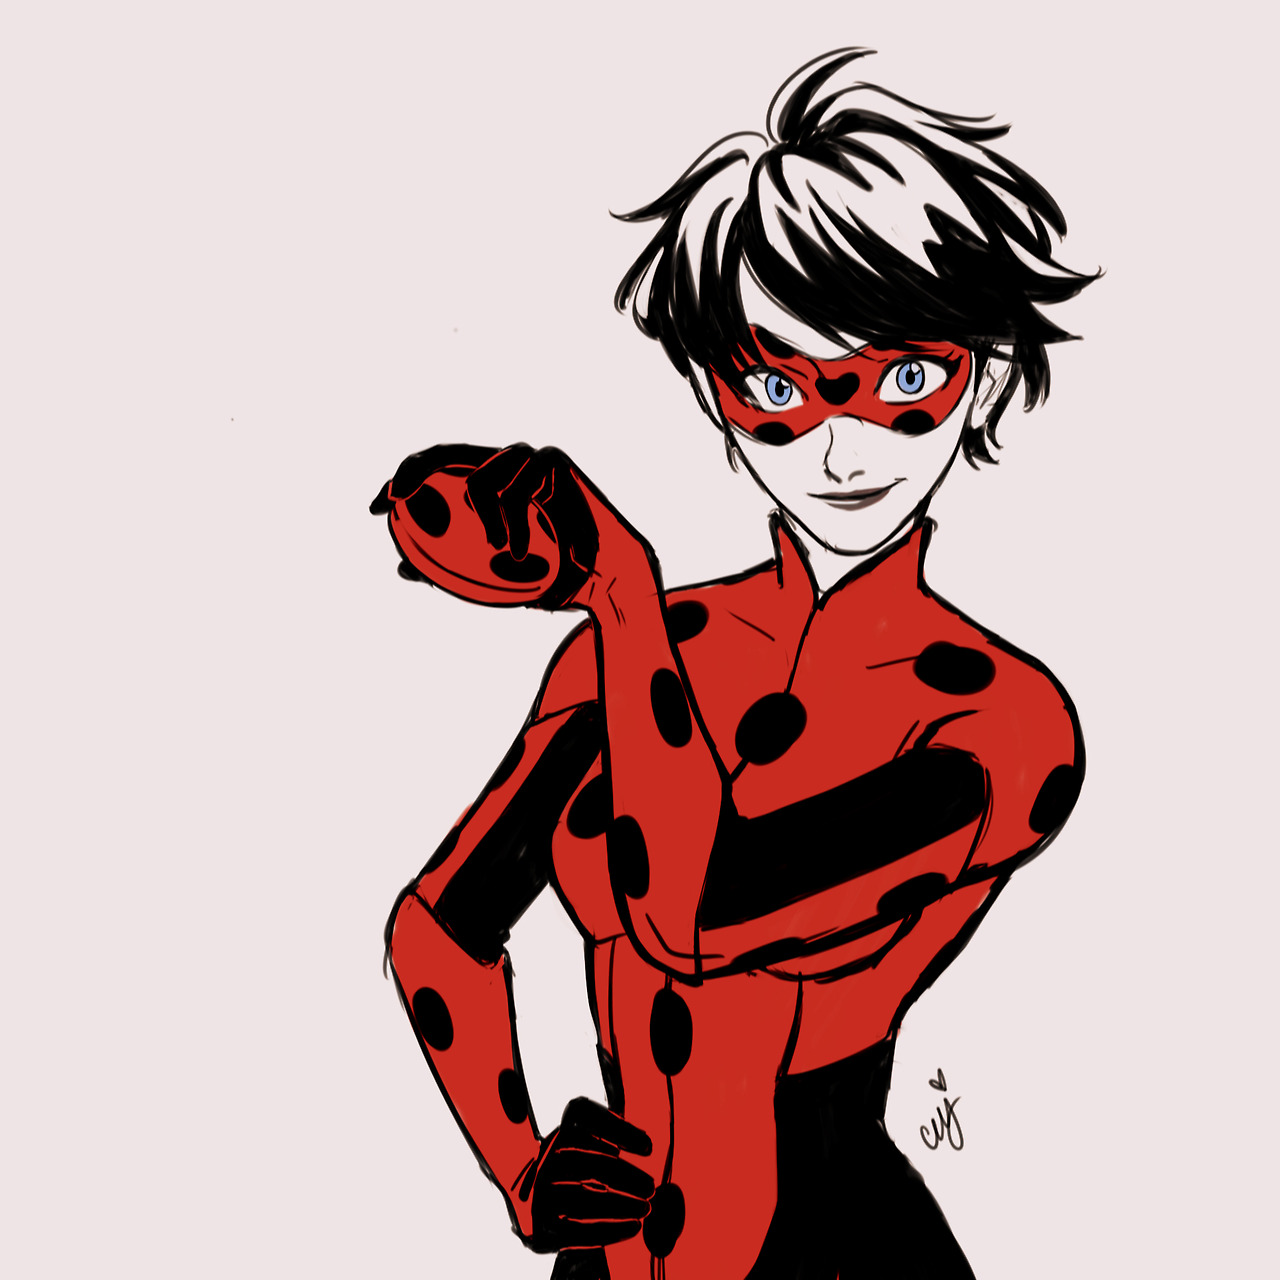 Short haired and adult Miraculous Ladybug - YouLoveIt.com